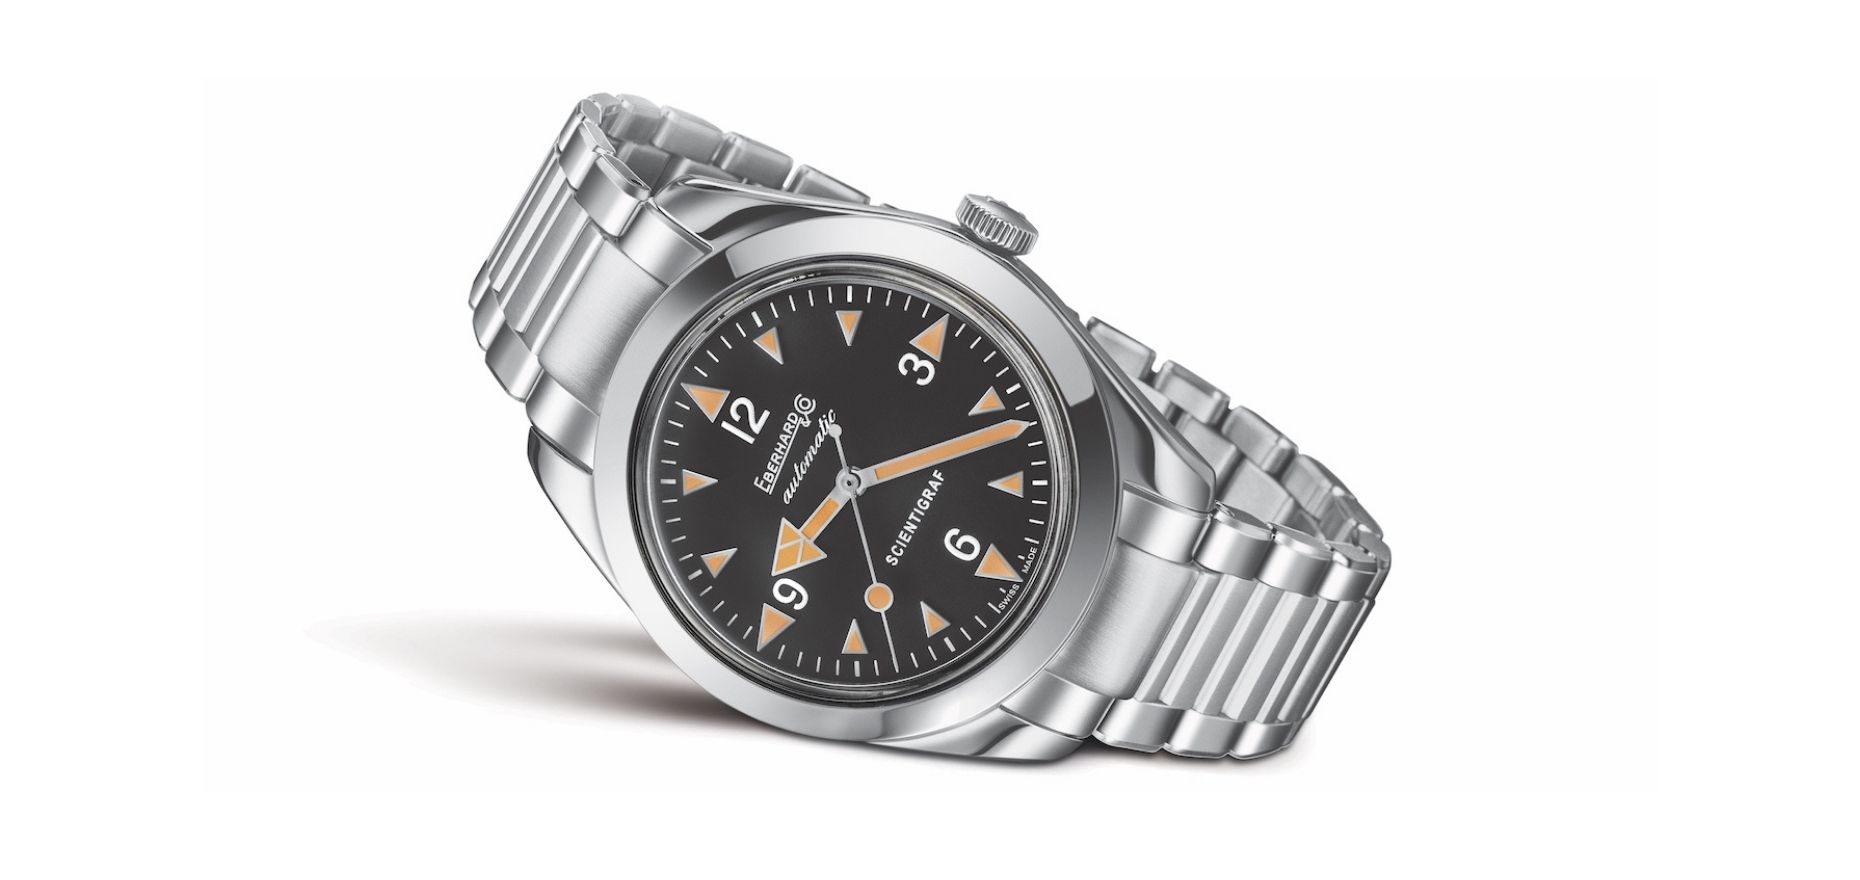 60 years of Scientigraf: Eberhard & Co. revives one of the world's first  anti-magnetic watches